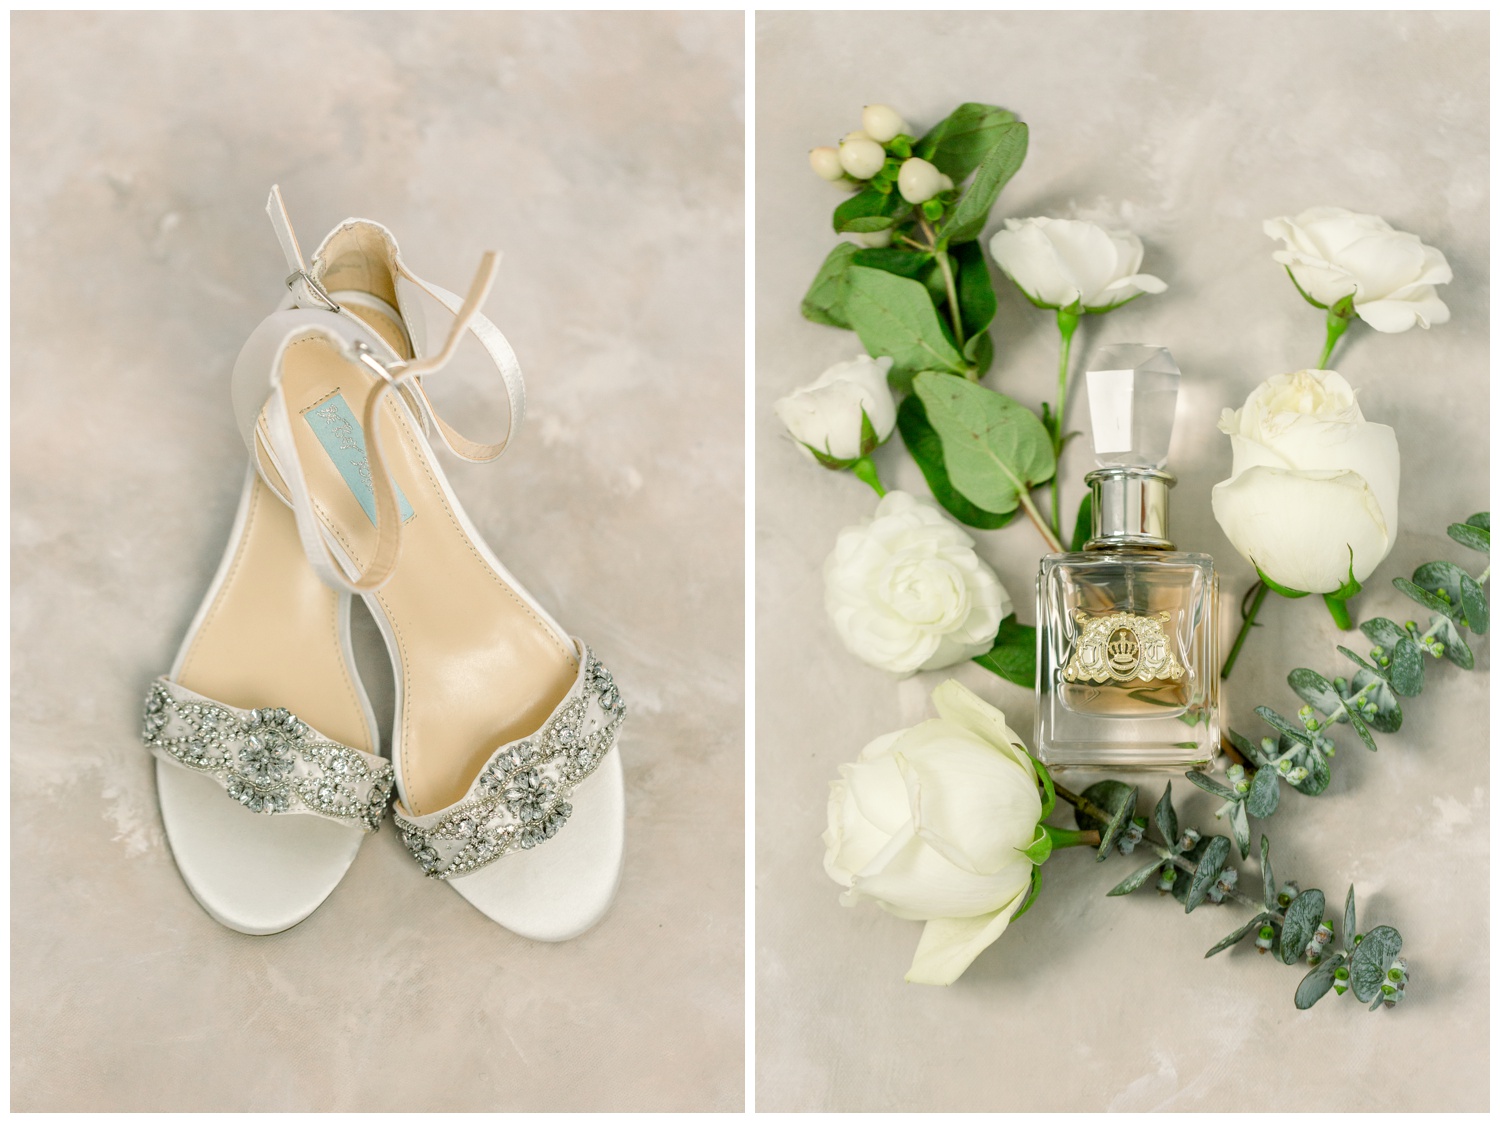 Bridal Shoes and Details at Barn Wedding in Dry Ridge Kentucky